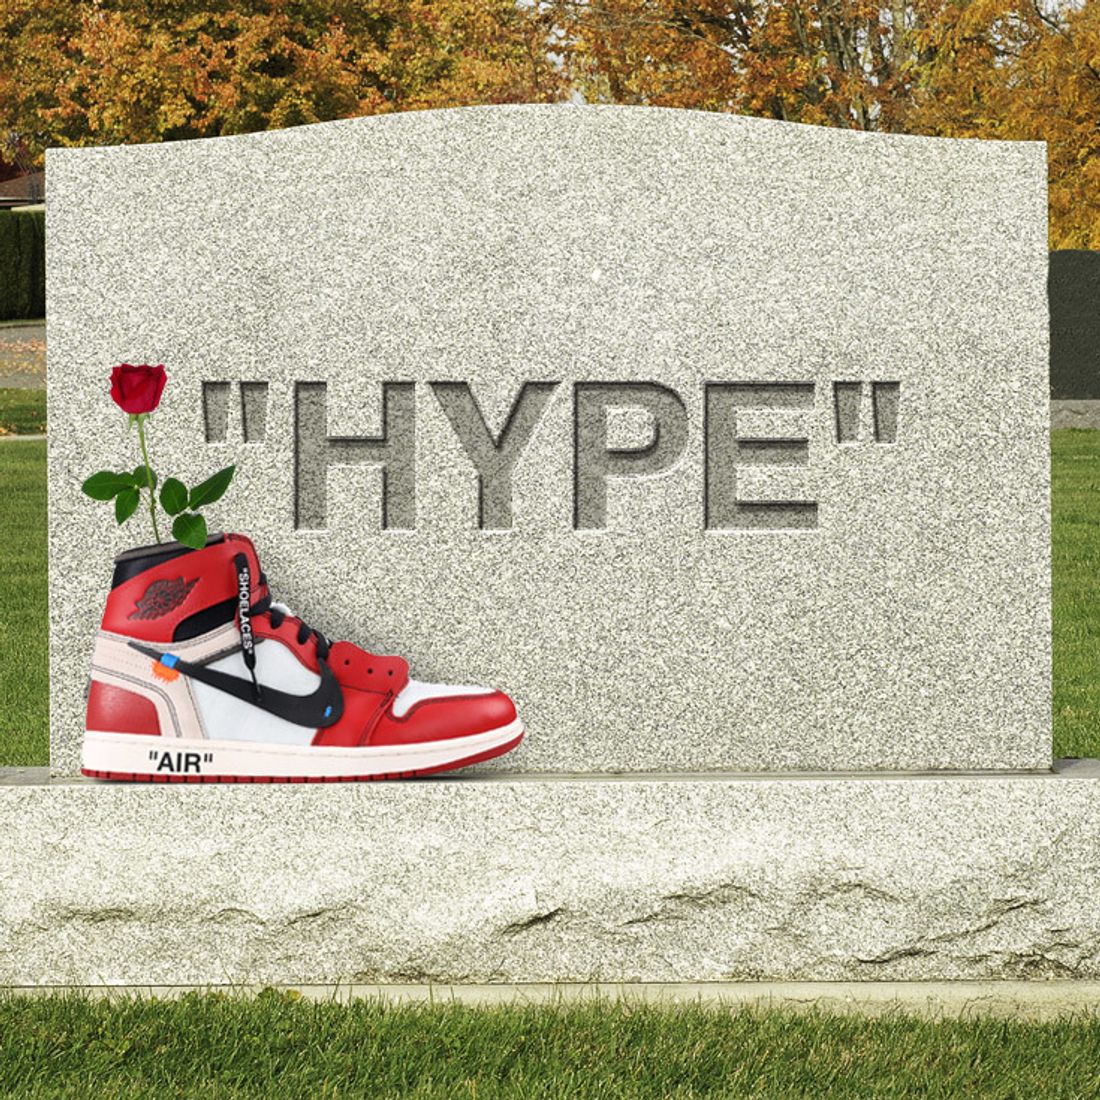 OFF WHITE x Nike Air Force 1 Hype and Expensive Sneaker